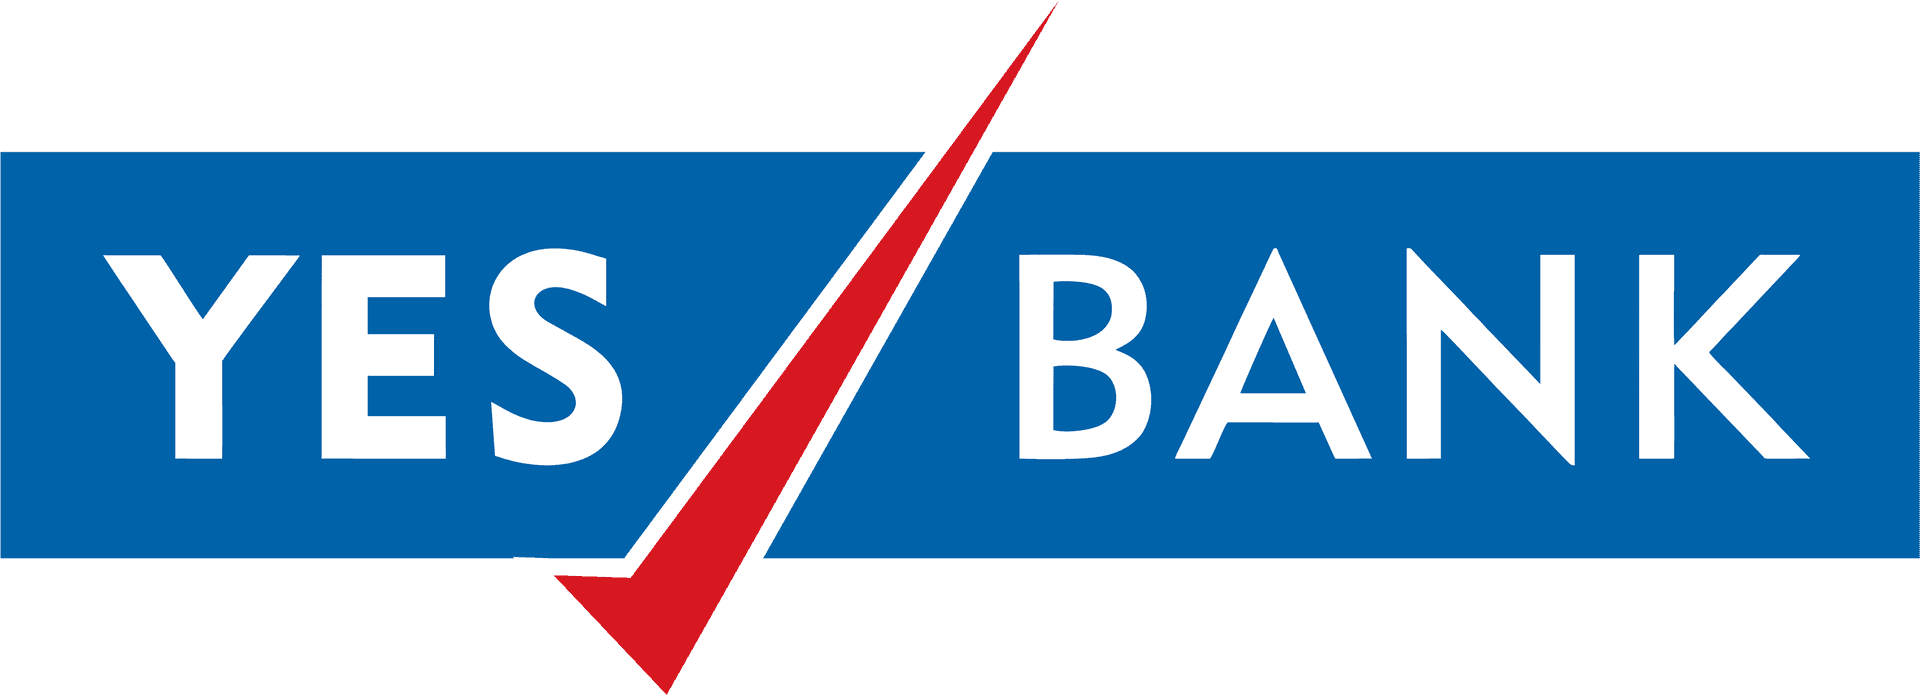 Yes Bank Logowith Red Arrow PNG